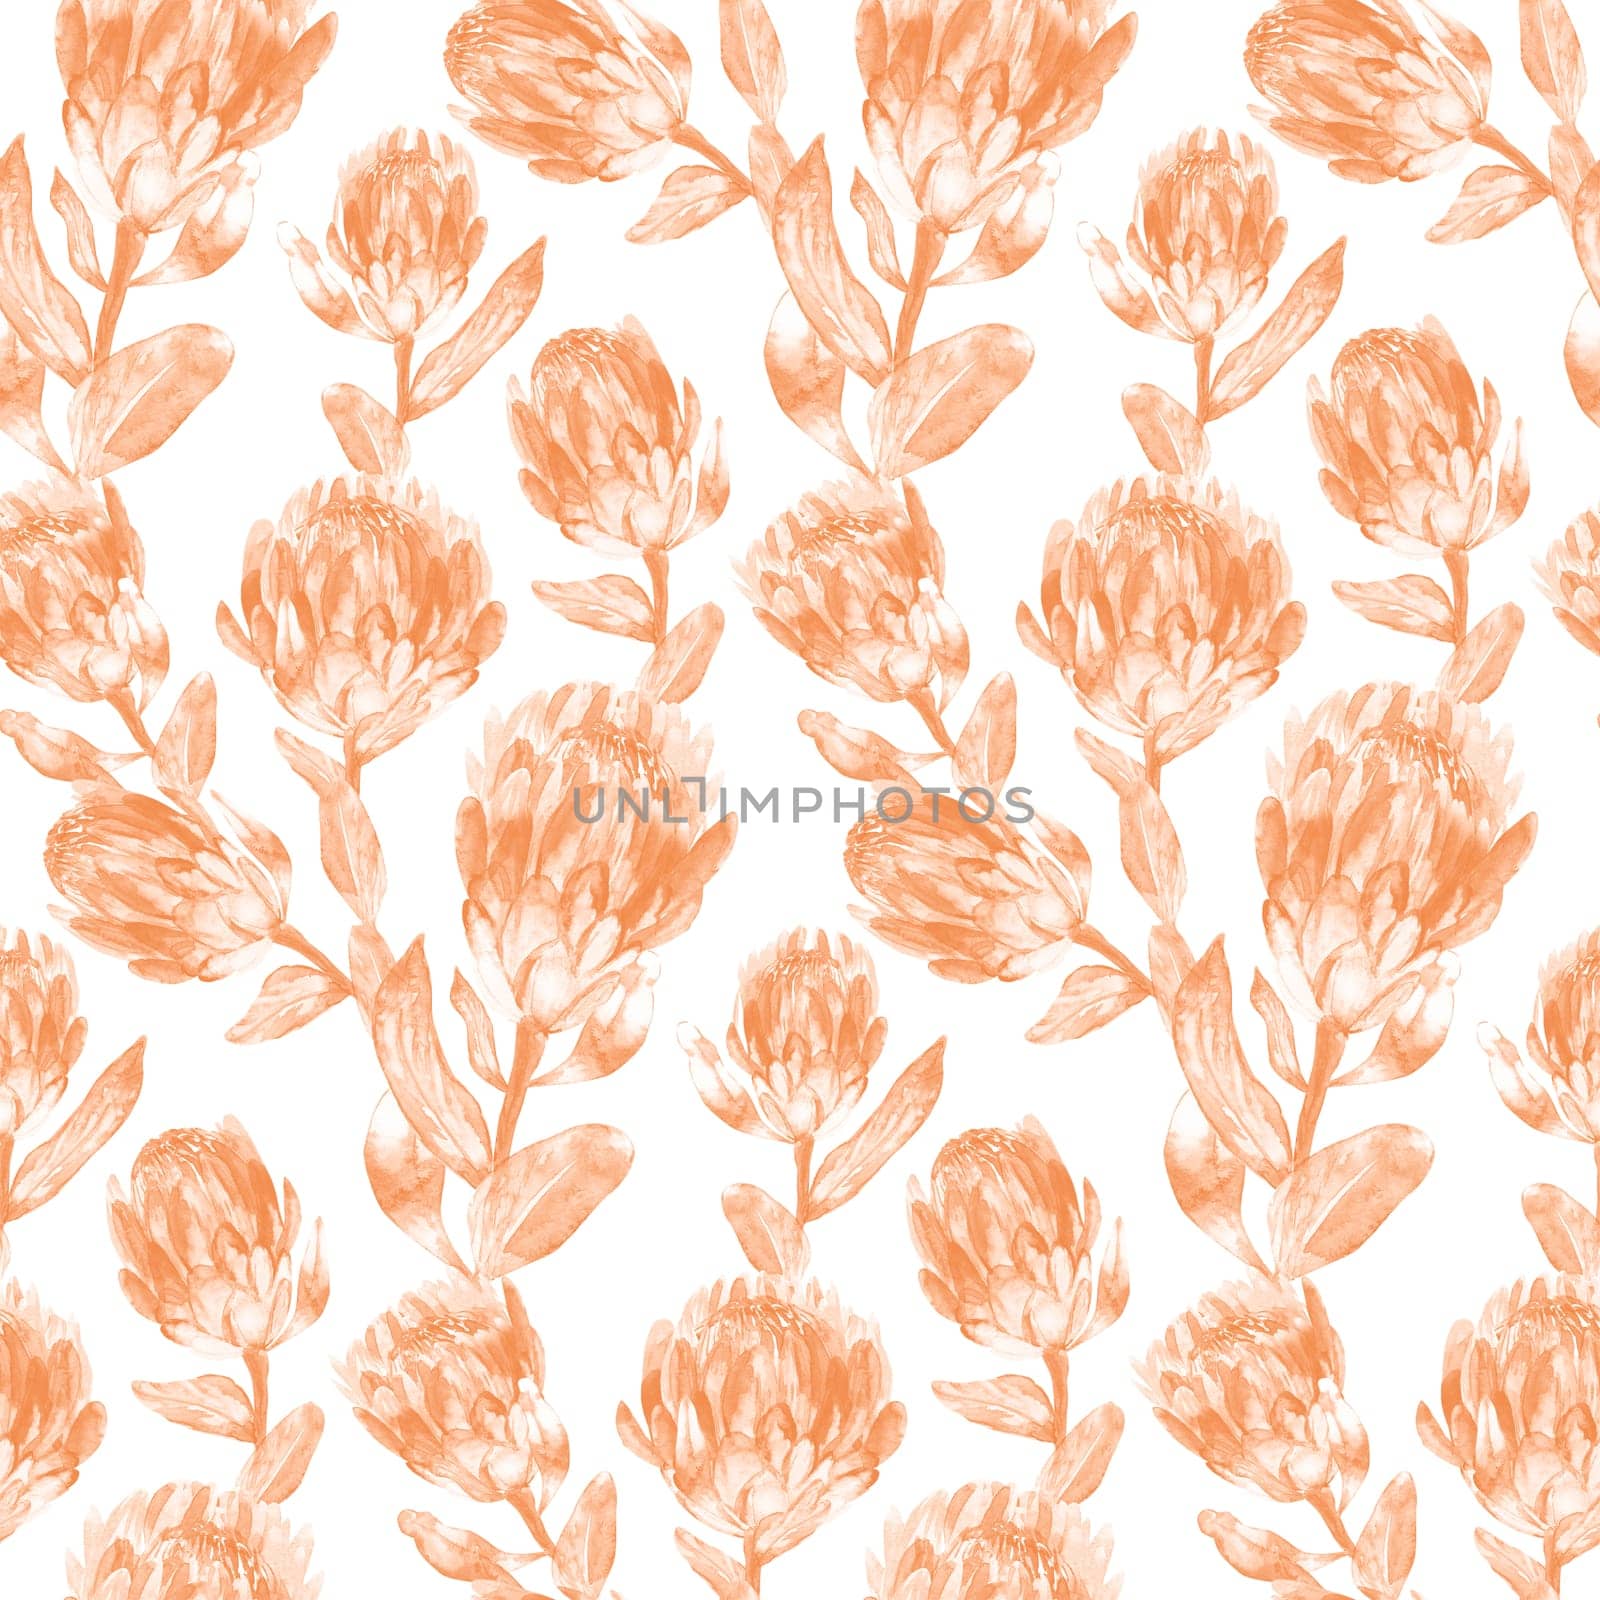 Seamless monochrome watercolor pattern with vertical protea flowers for textile and surface design by MarinaVoyush